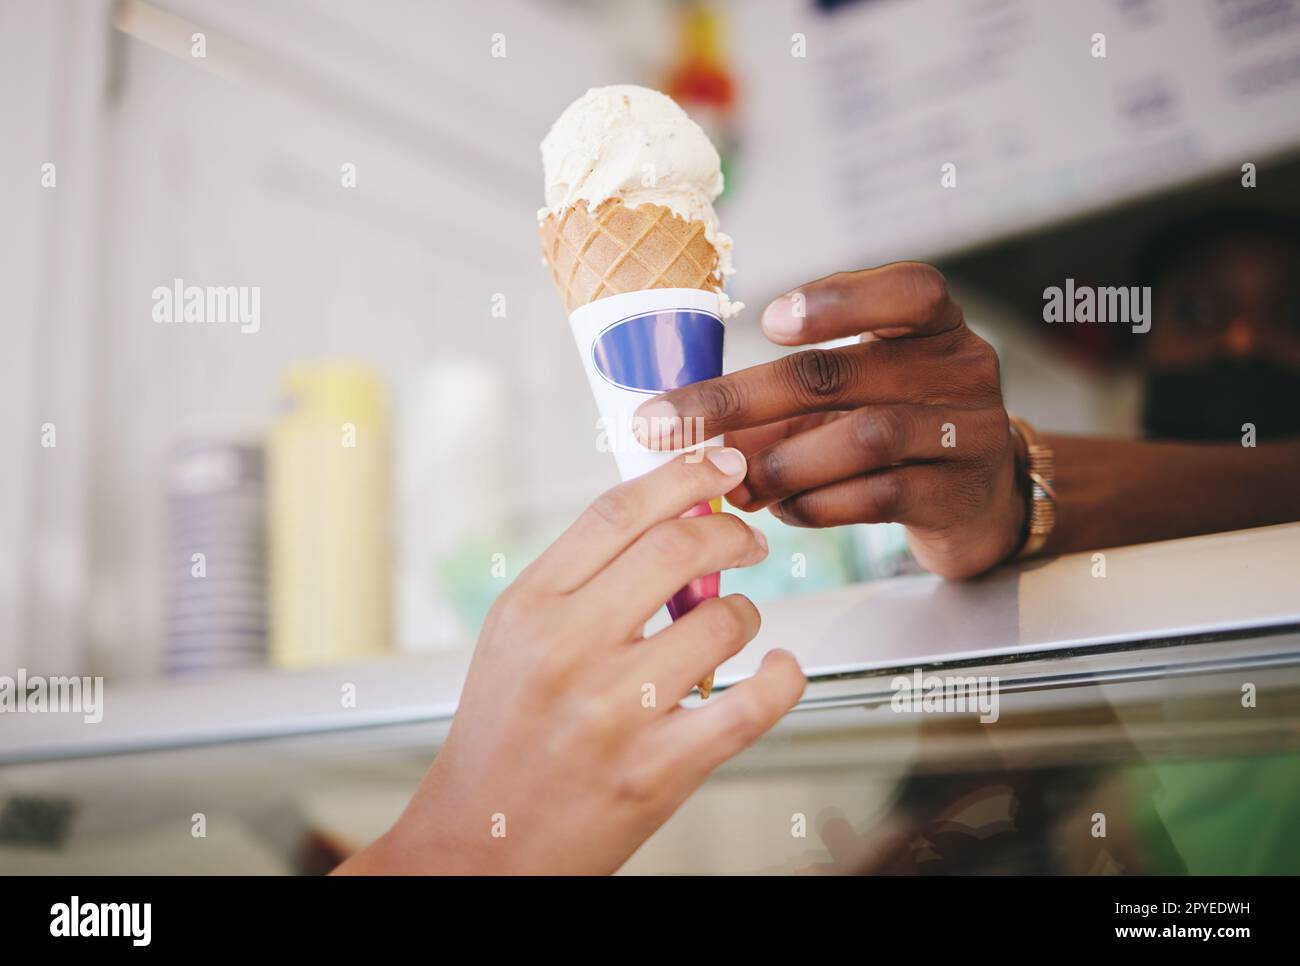 Hands, ice cream and woman buying icecream cone at a shop, local and small business support. Sugar, dessert and person purchase snack from seller to enjoy on summer day as a frozen sweet in the city Stock Photo